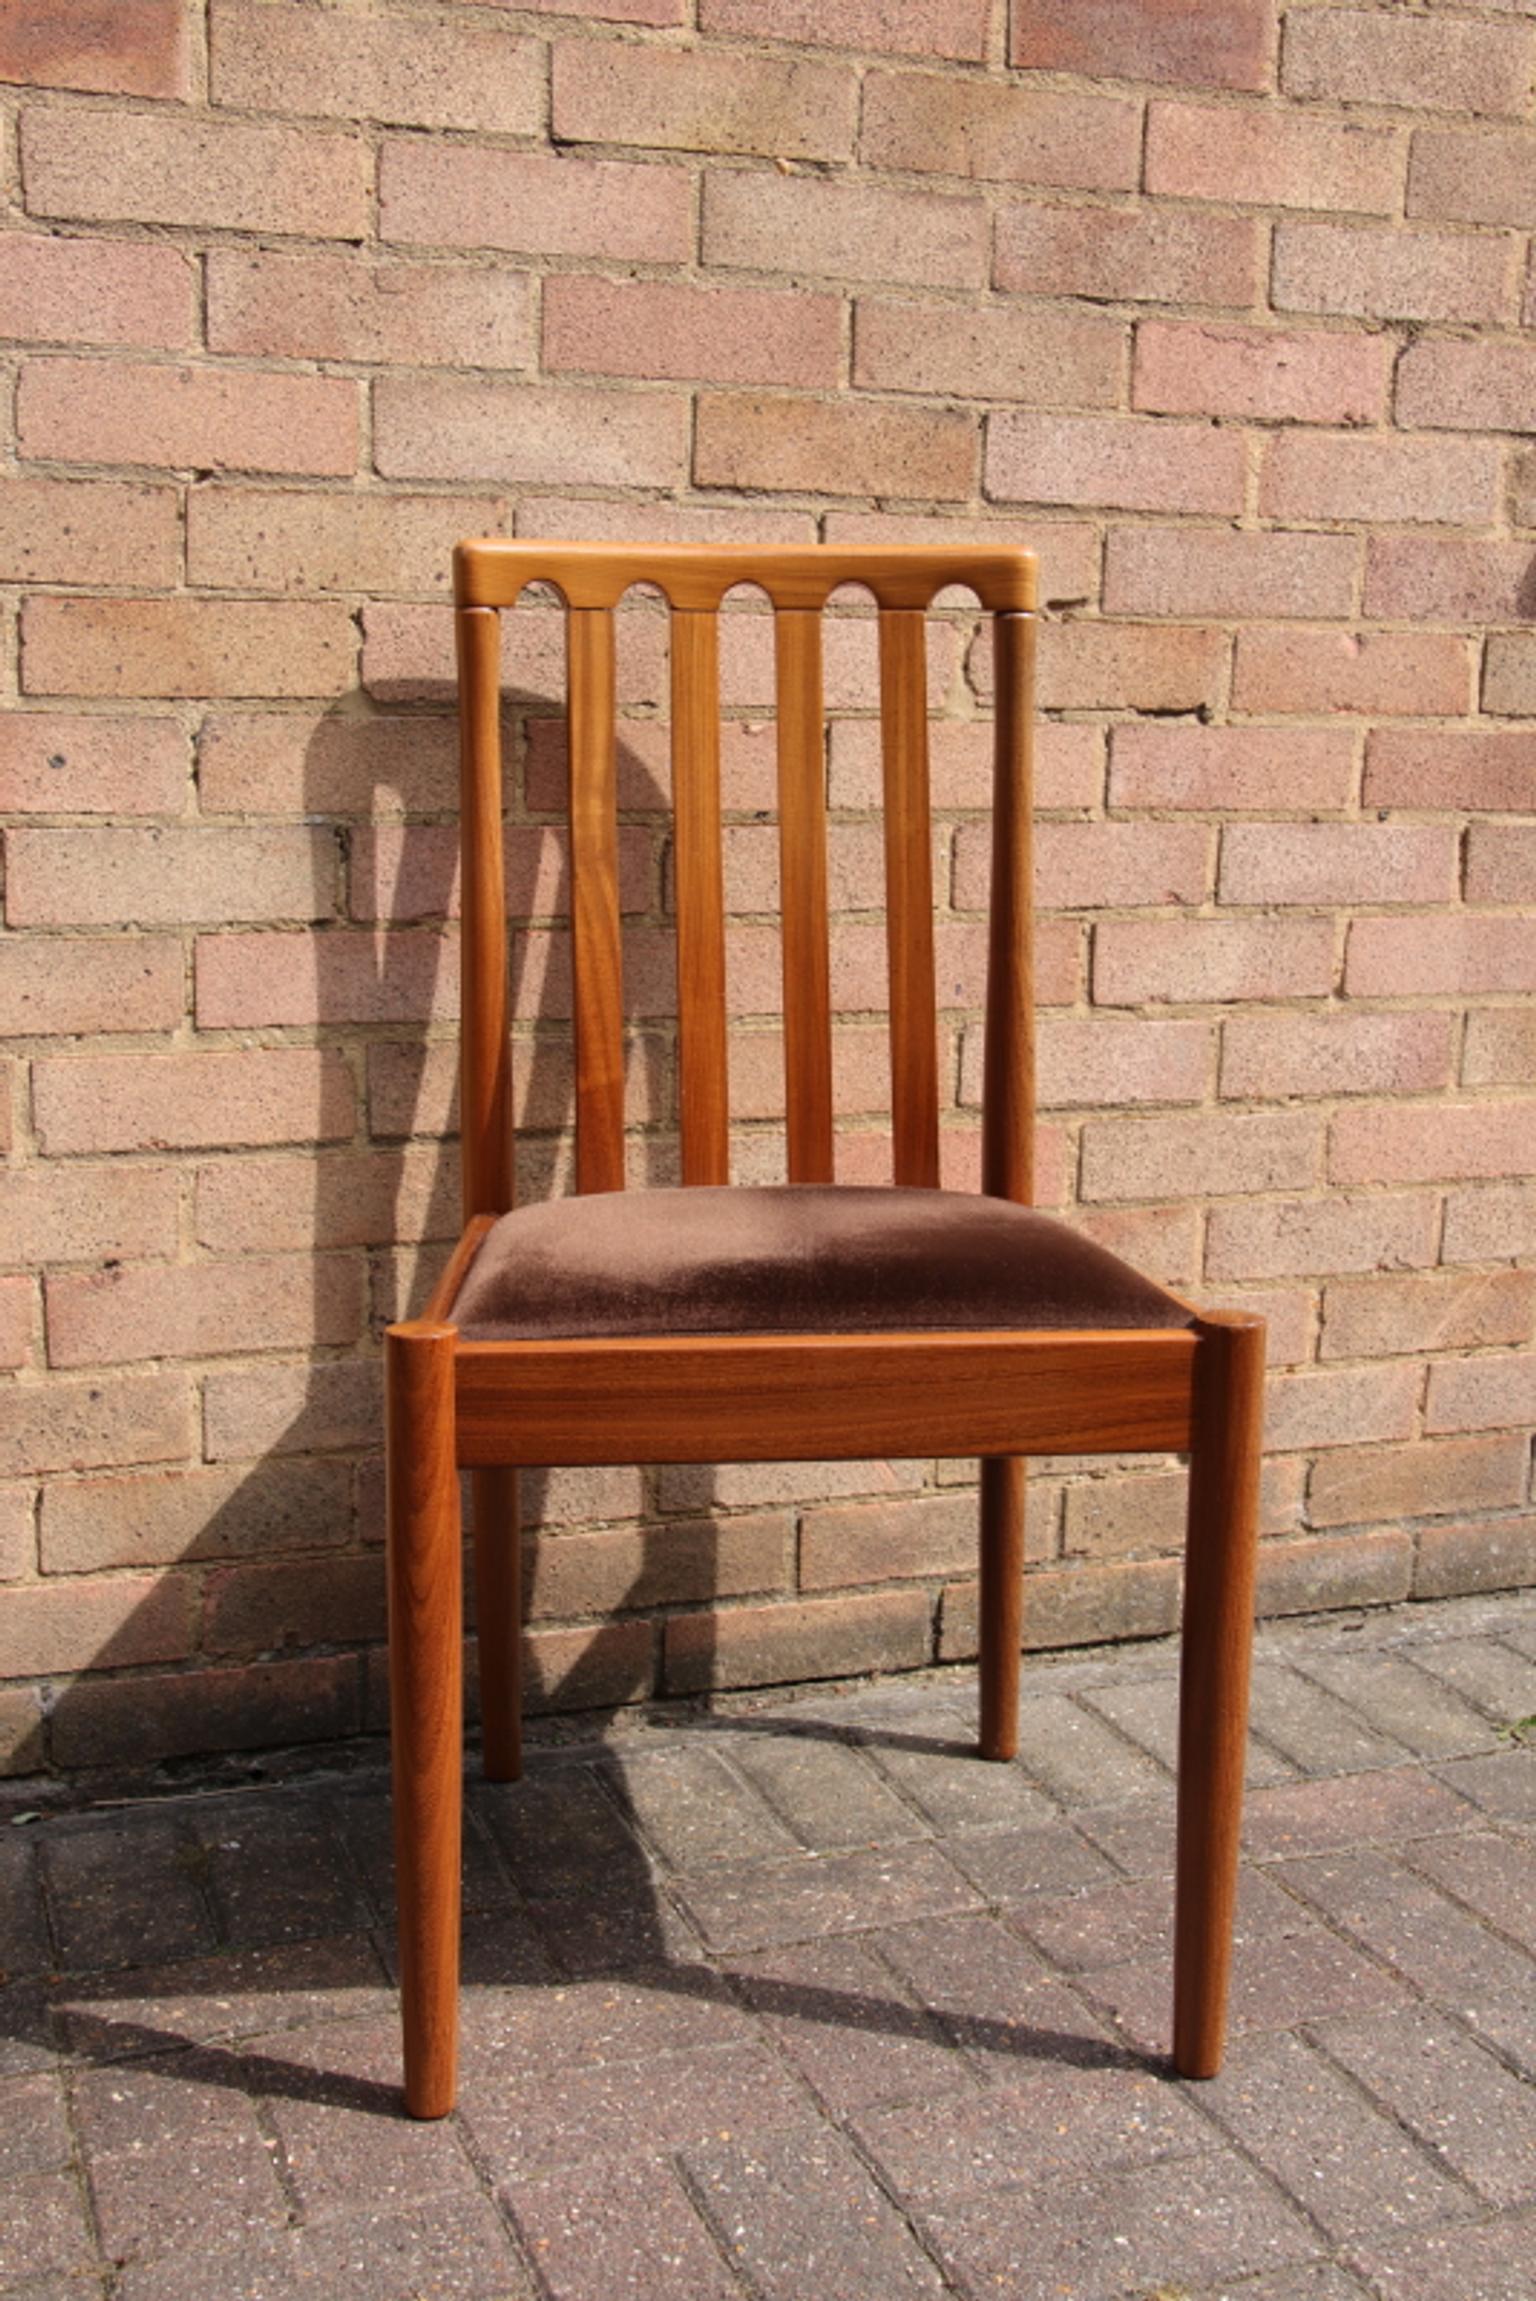 Four Wooden Dining Room Chairs in Holywell for £25.00 for sale | Shpock